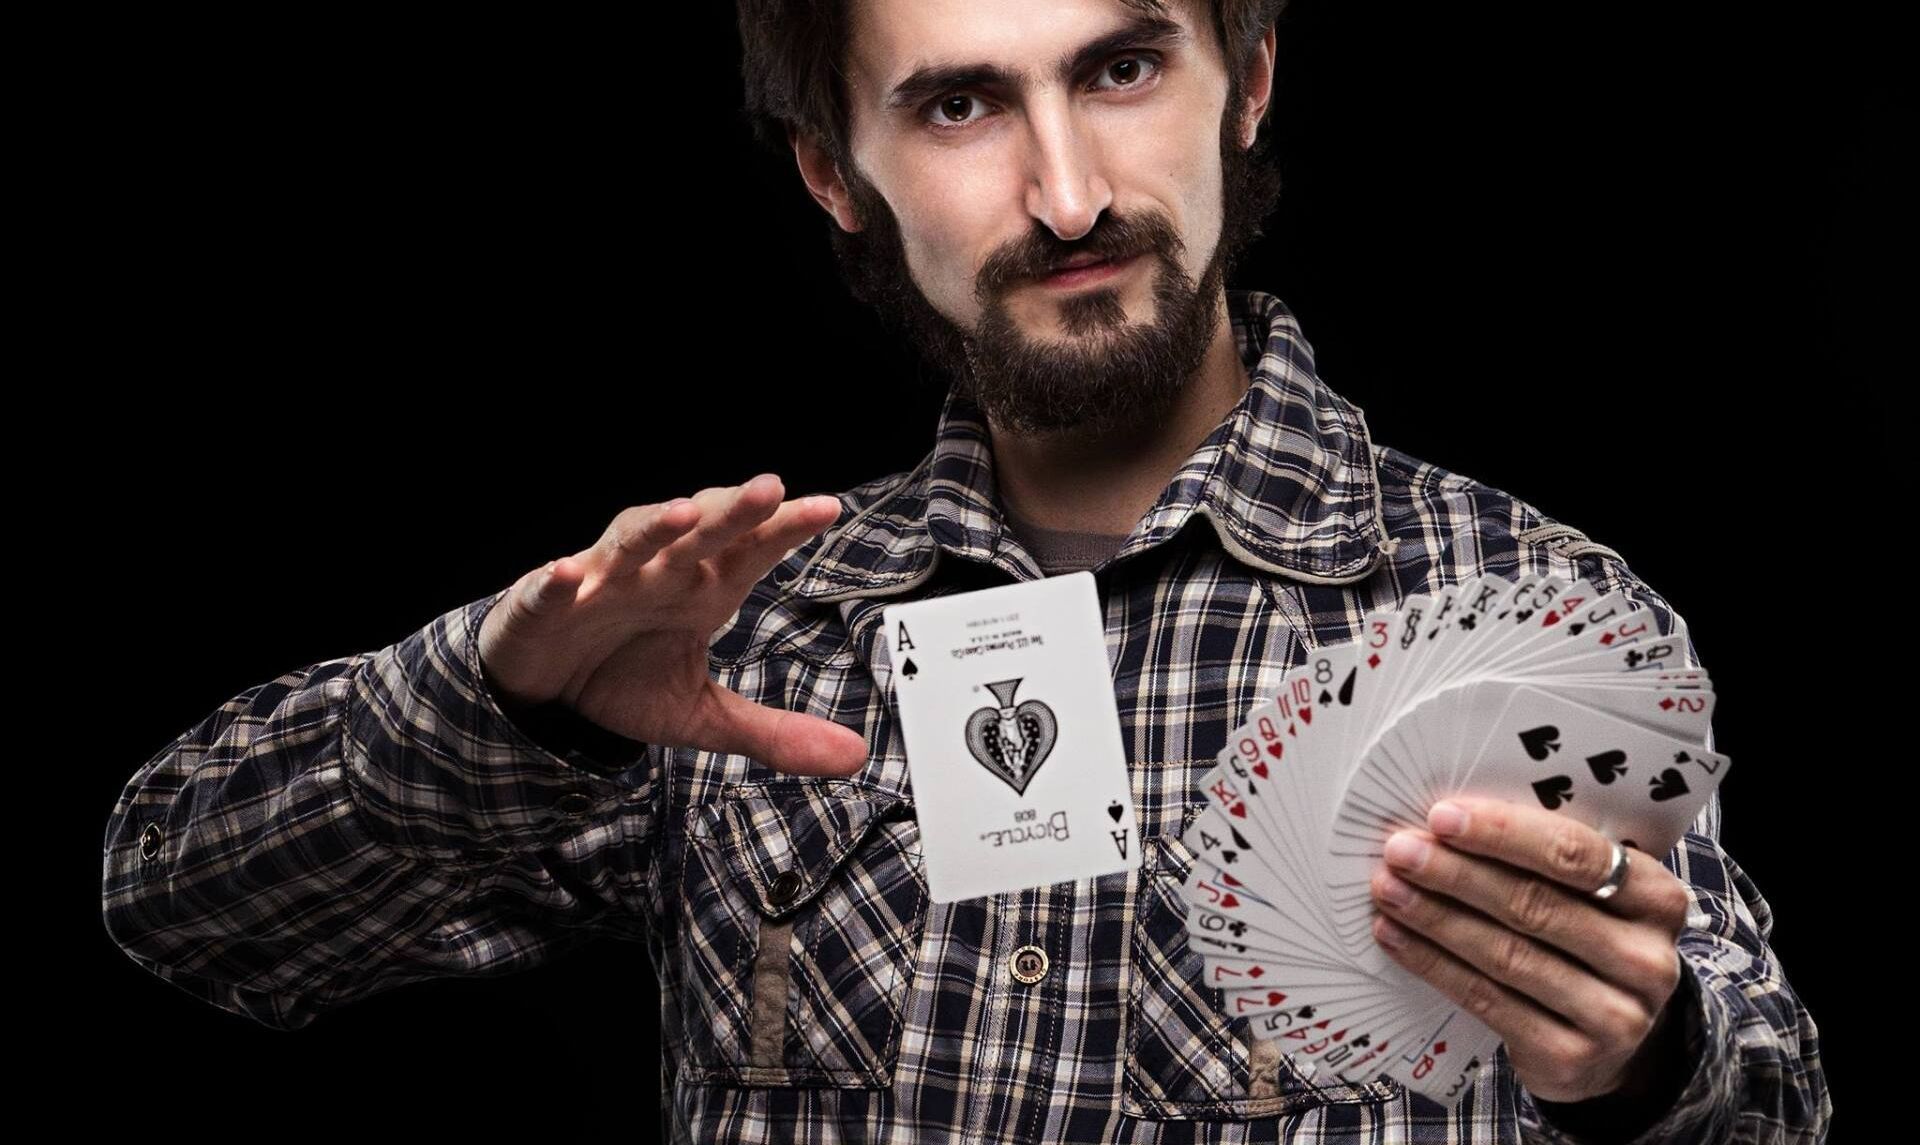 Magician with a floating Ace of Spades as an alternative to a photo booth